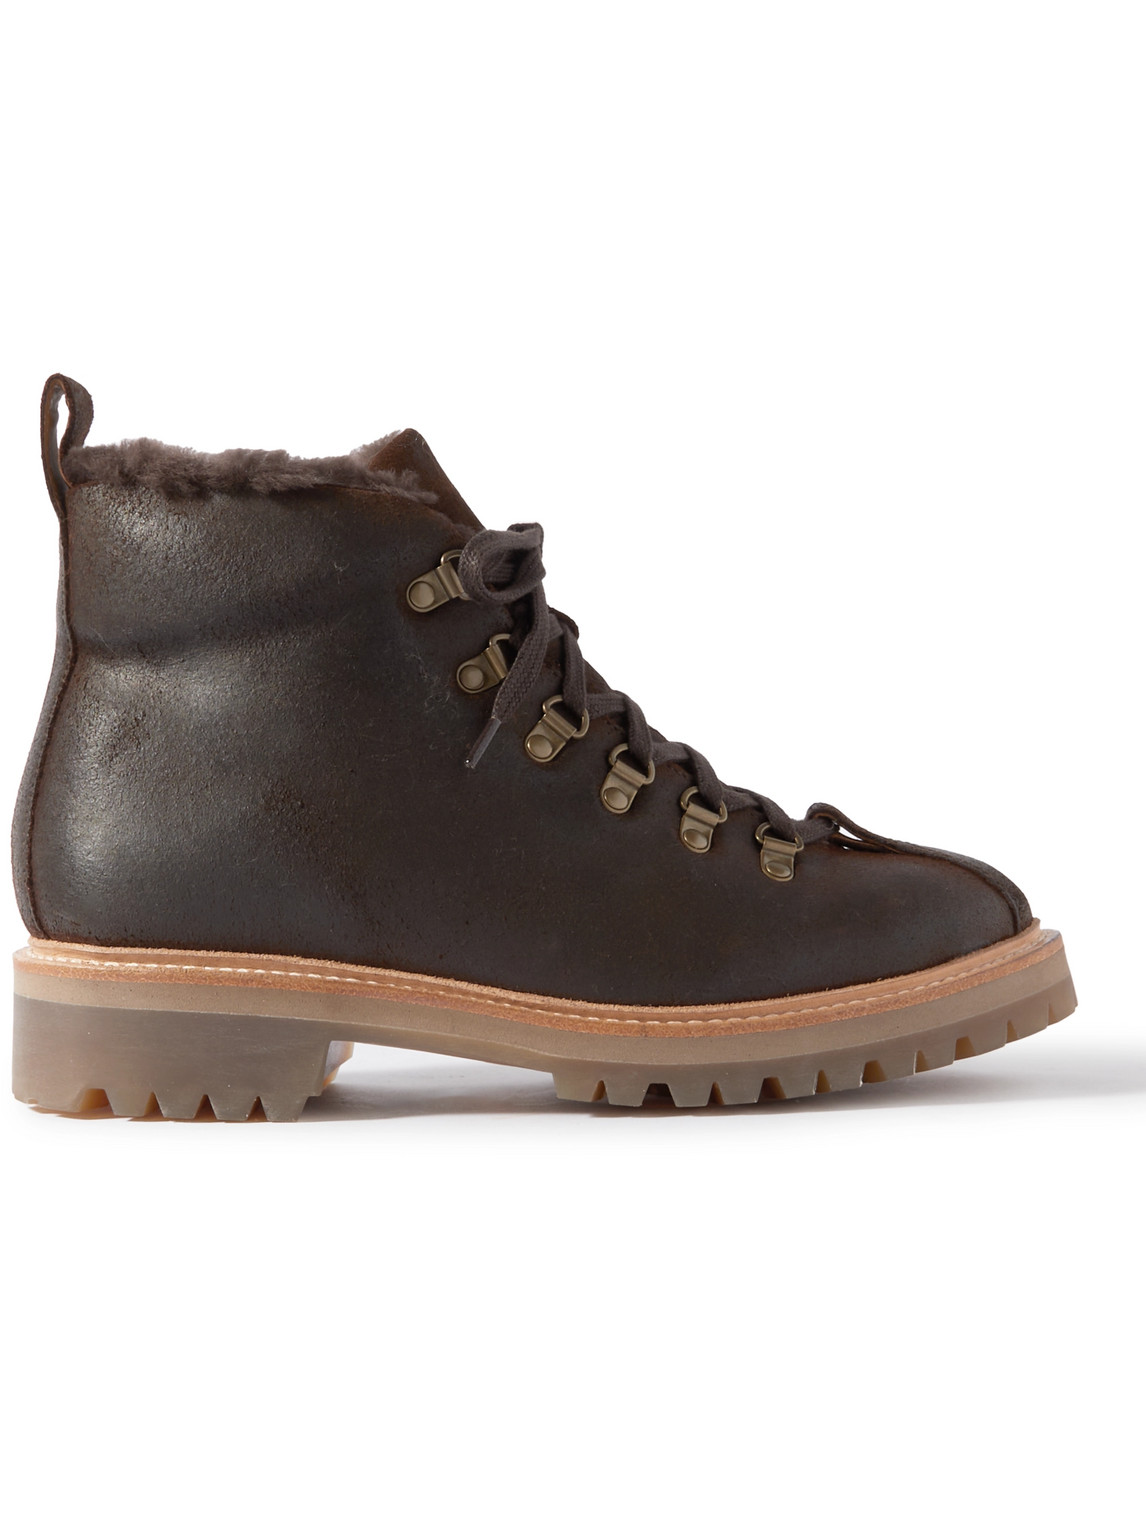 Bobby Shearling-Lined Waxed-Leather Boots